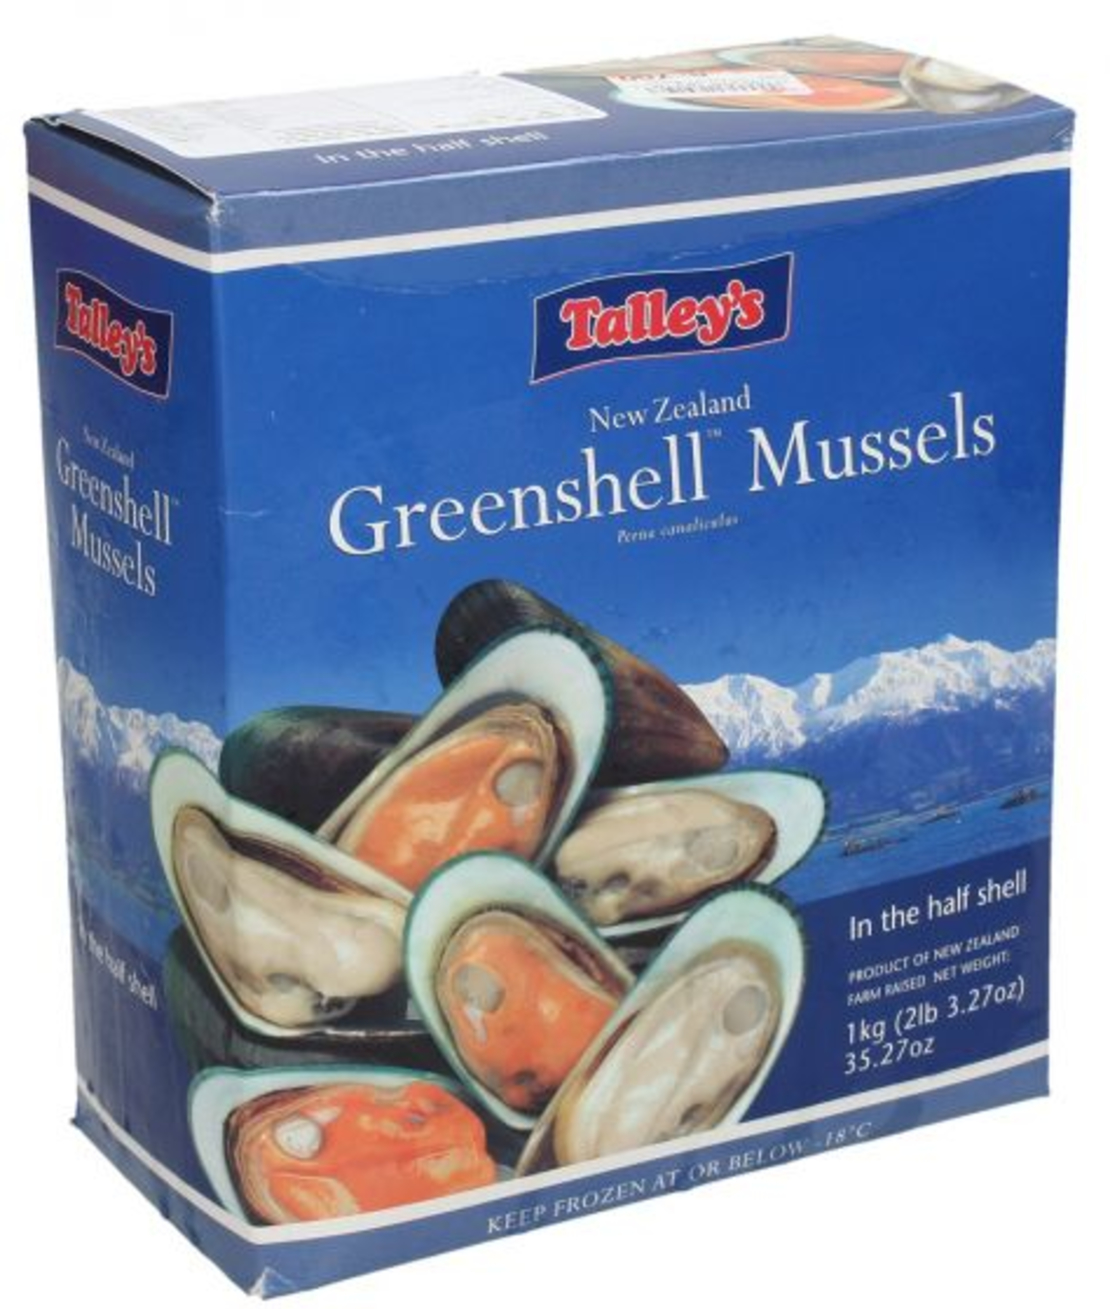  Talley's - GreenShell Mussels in the half shell - 1kg